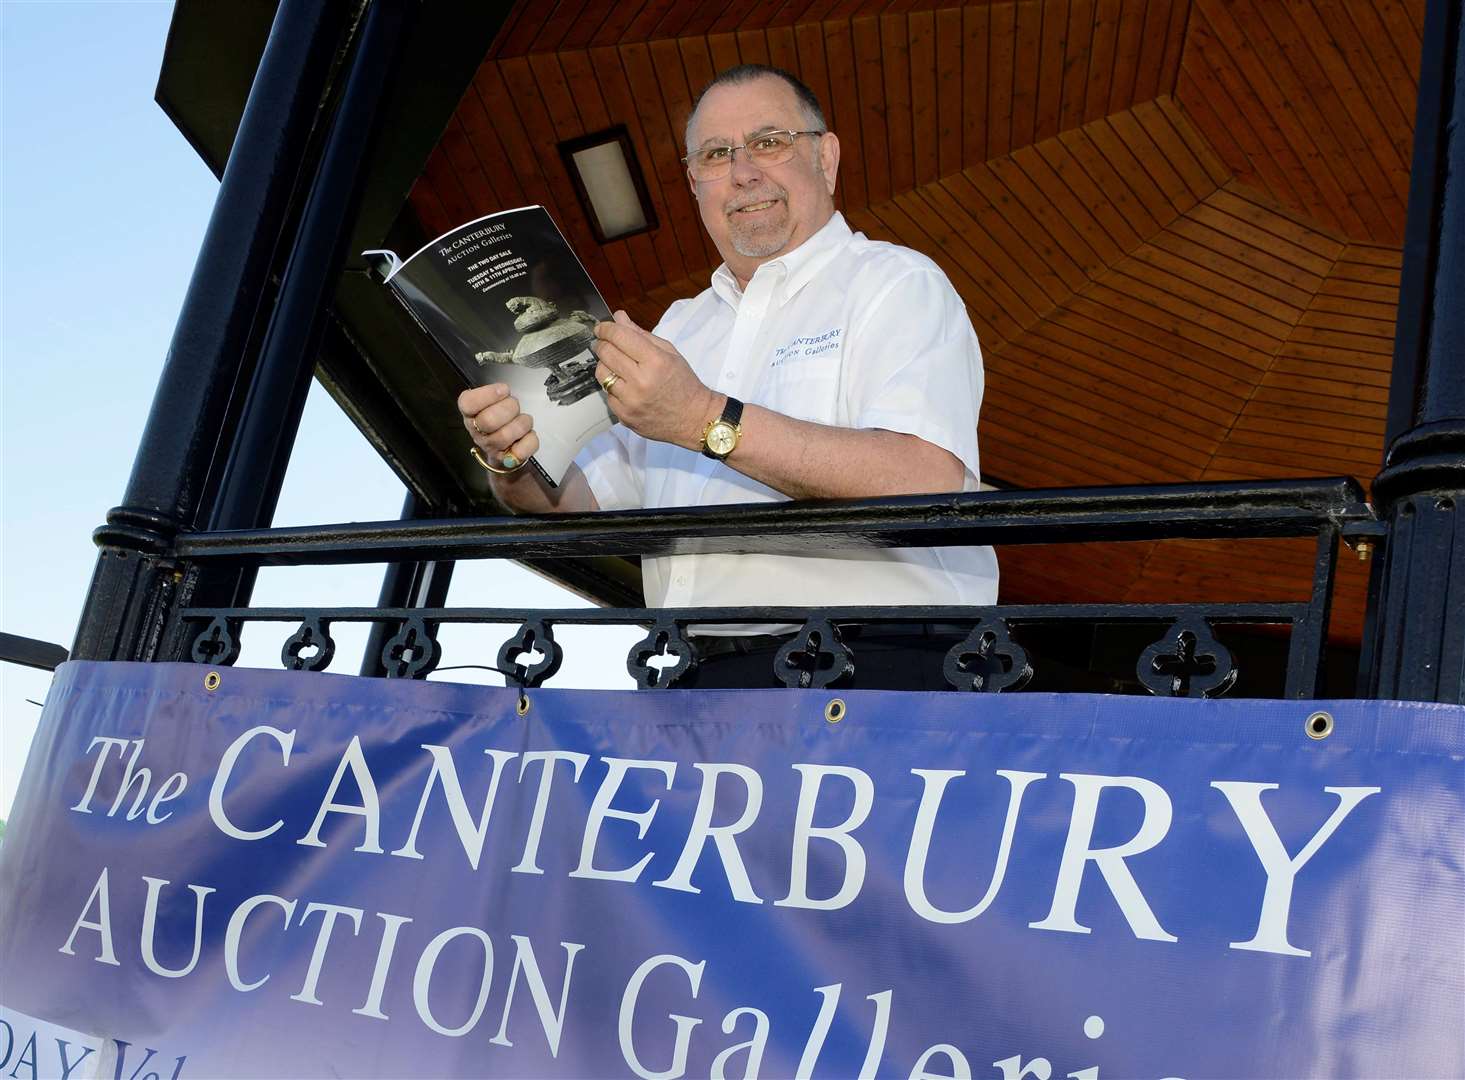 David Parker, managing director of The Canterbury Auction Galleries